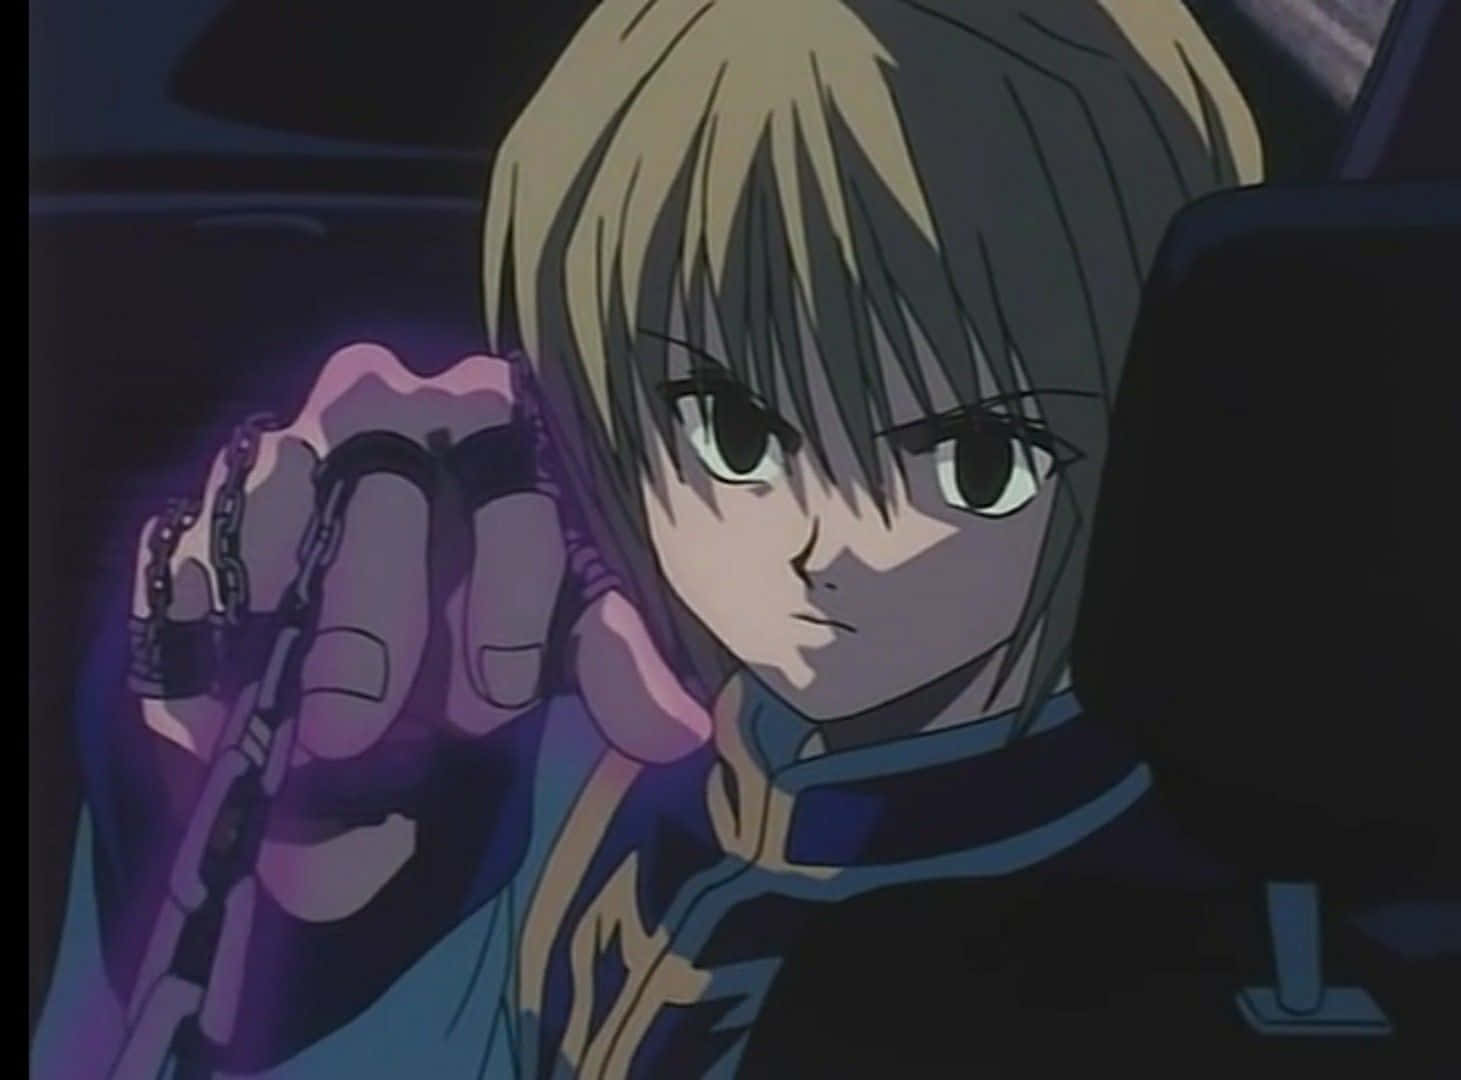 Finger Chains Kurapika Pfp, Which Refers To A Computer Or Mobile Wallpaper Featuring Characters From The Anime Series Hunter X Hunter, Can Be Translated To Swedish As Fingerkedjor Kurapika Pfp. Wallpaper